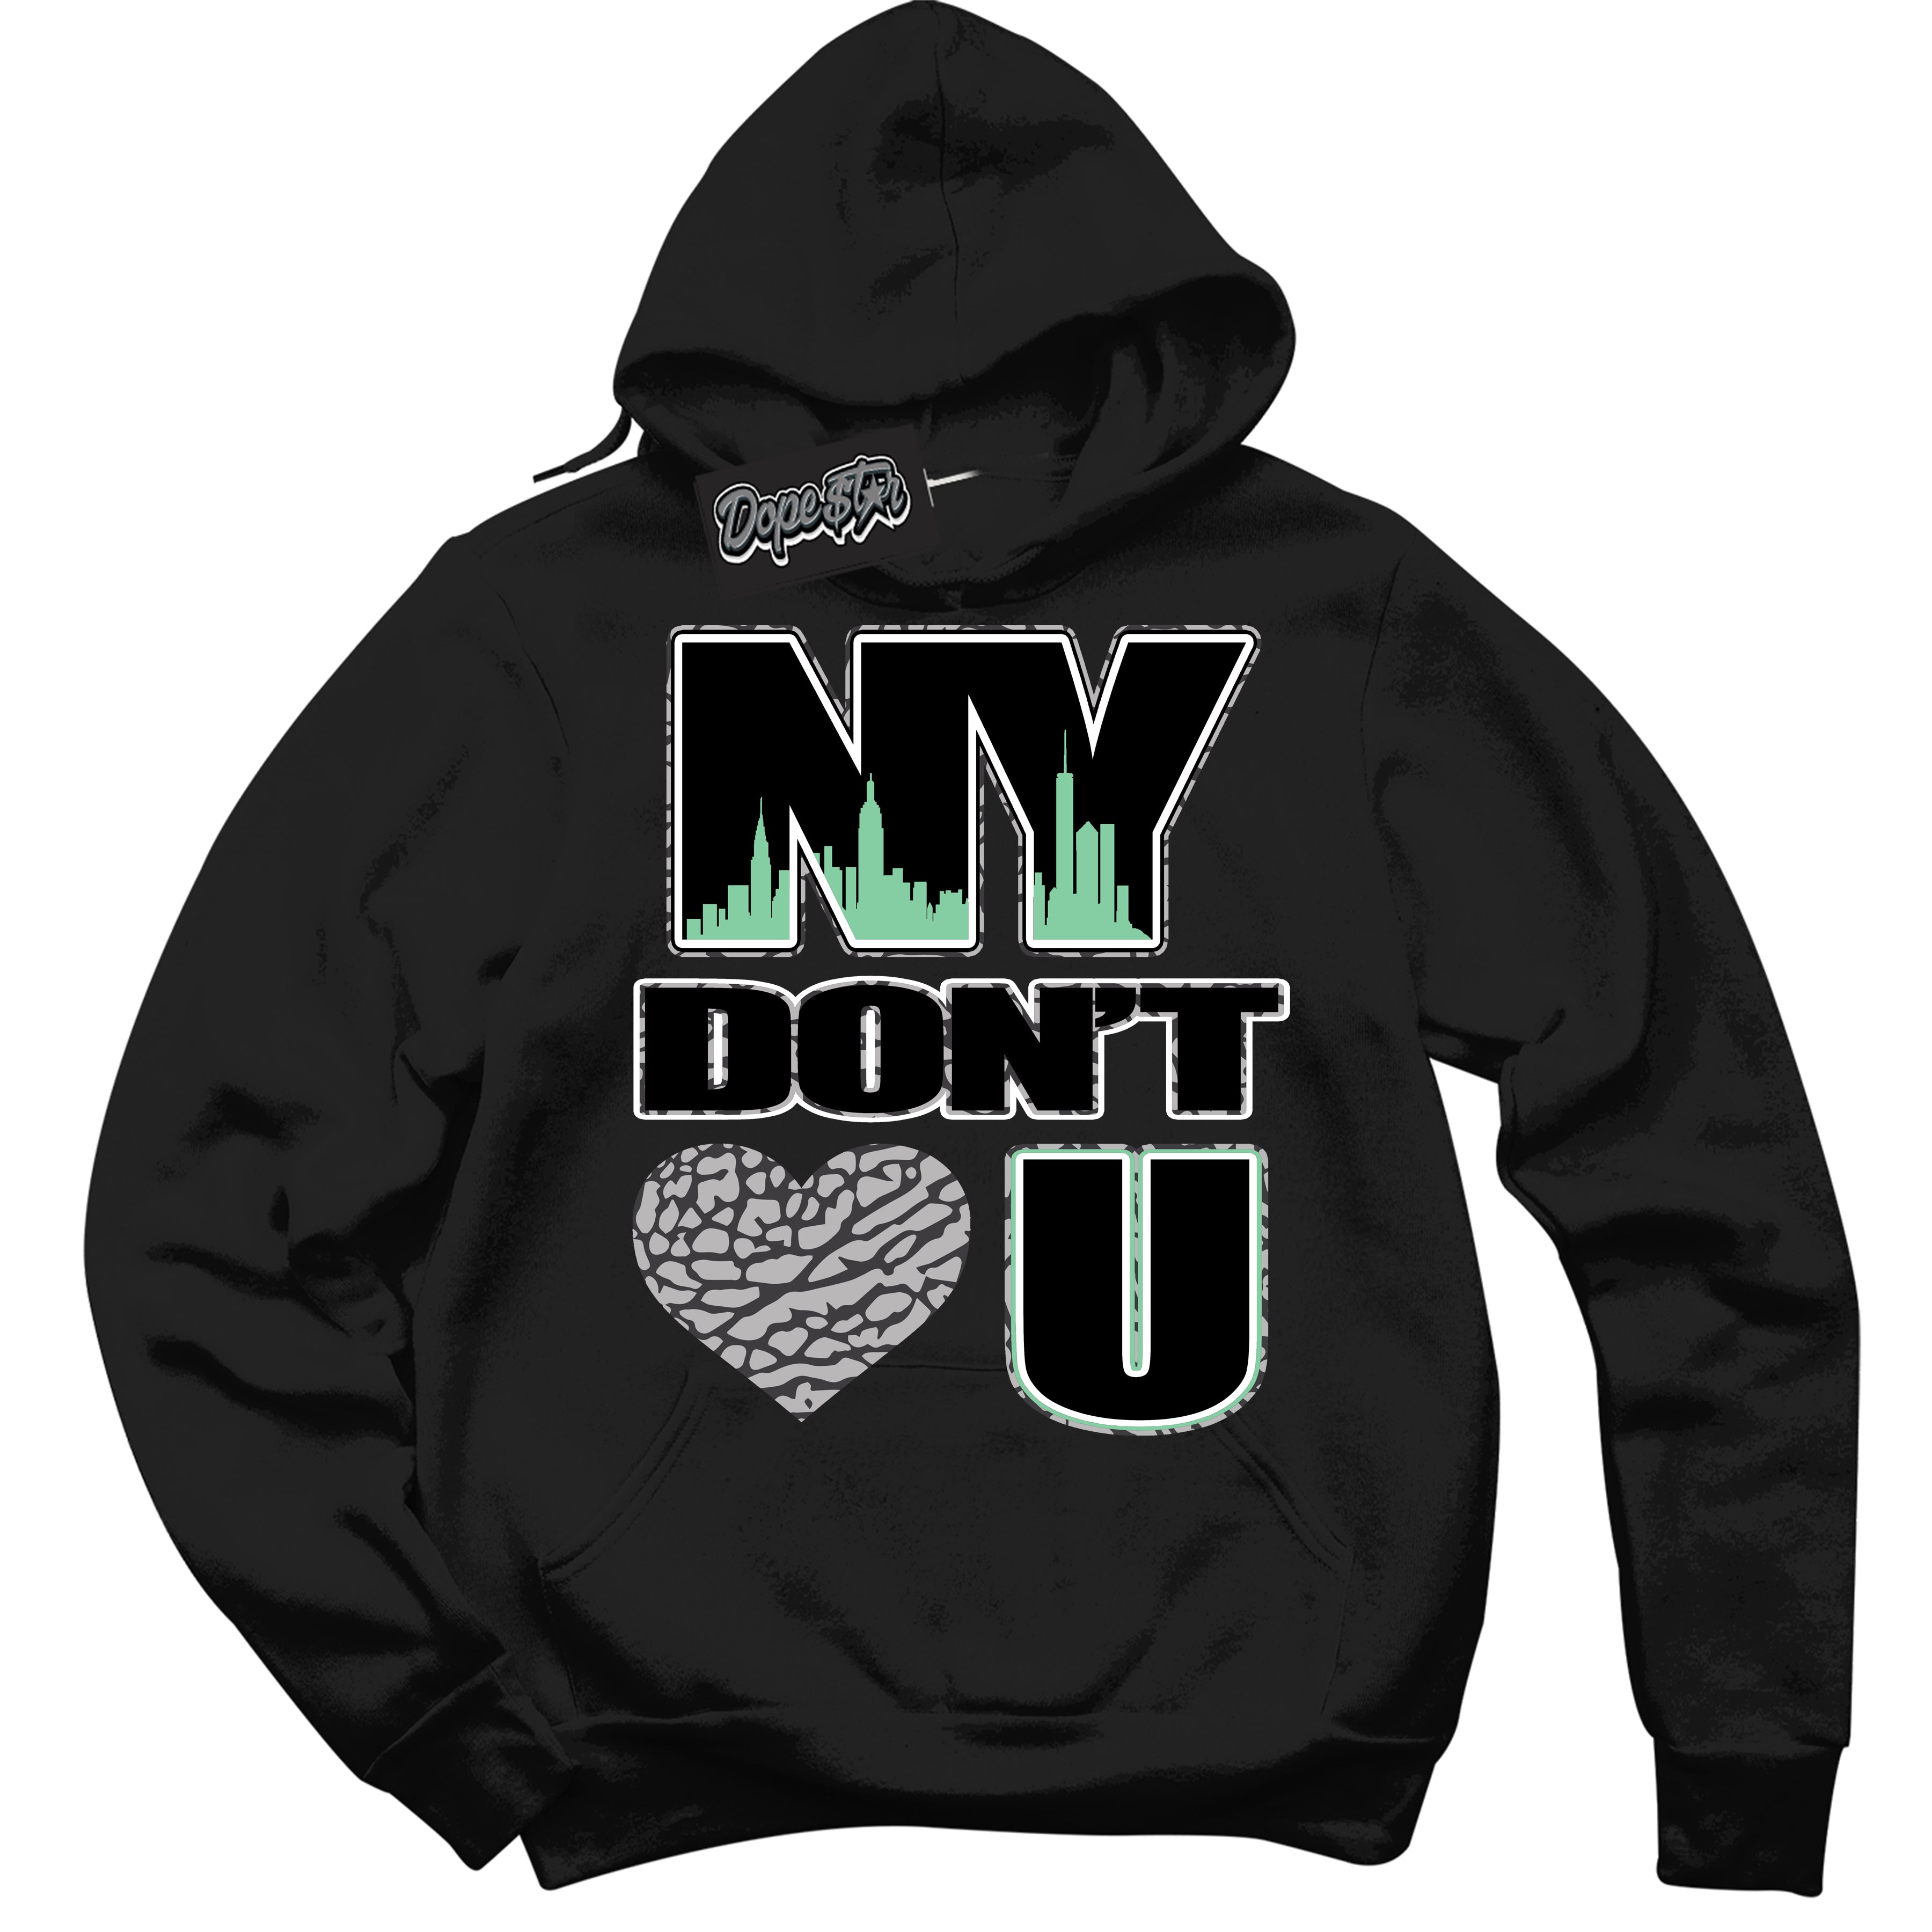 Cool Black Graphic DopeStar Hoodie with “ NY Don't Love You “ print, that perfectly matches Green Glow 3S sneakers